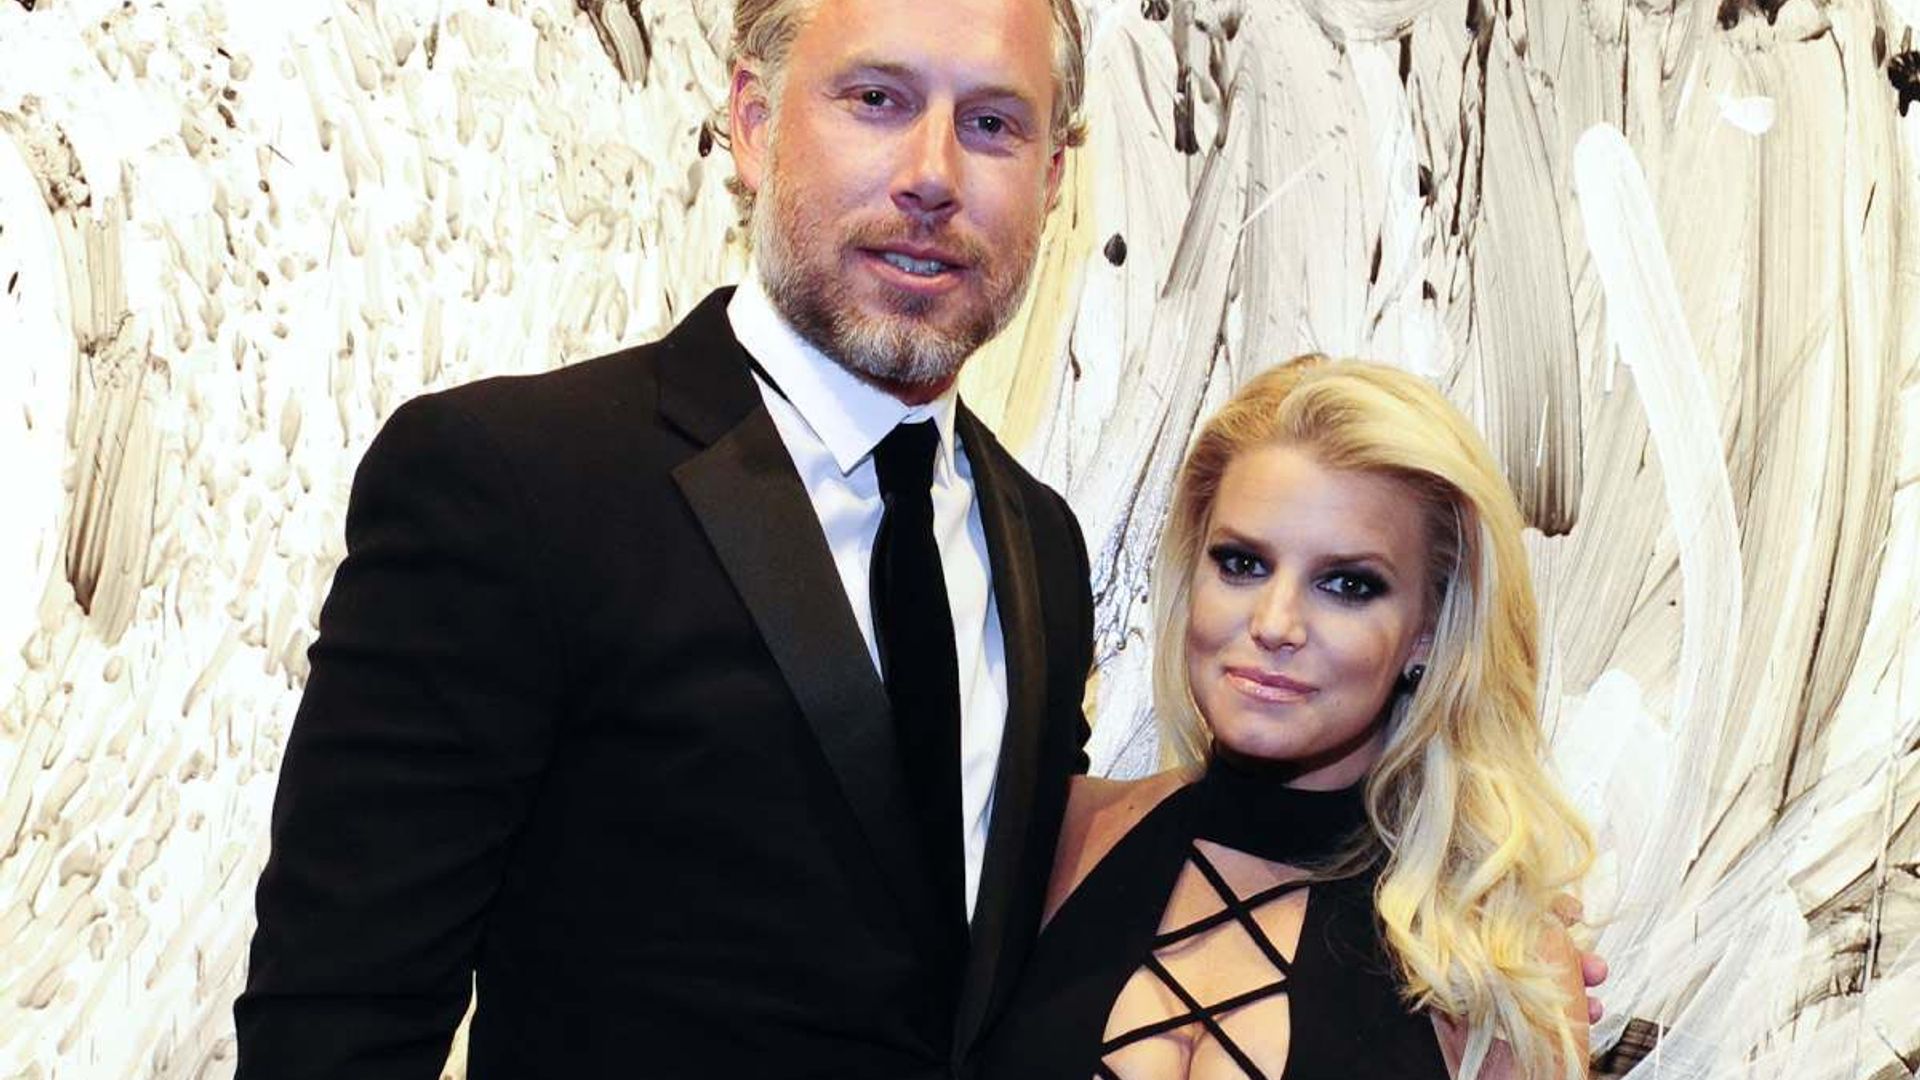 What Jessica Simpson has said about husband Eric Johnson and relationship